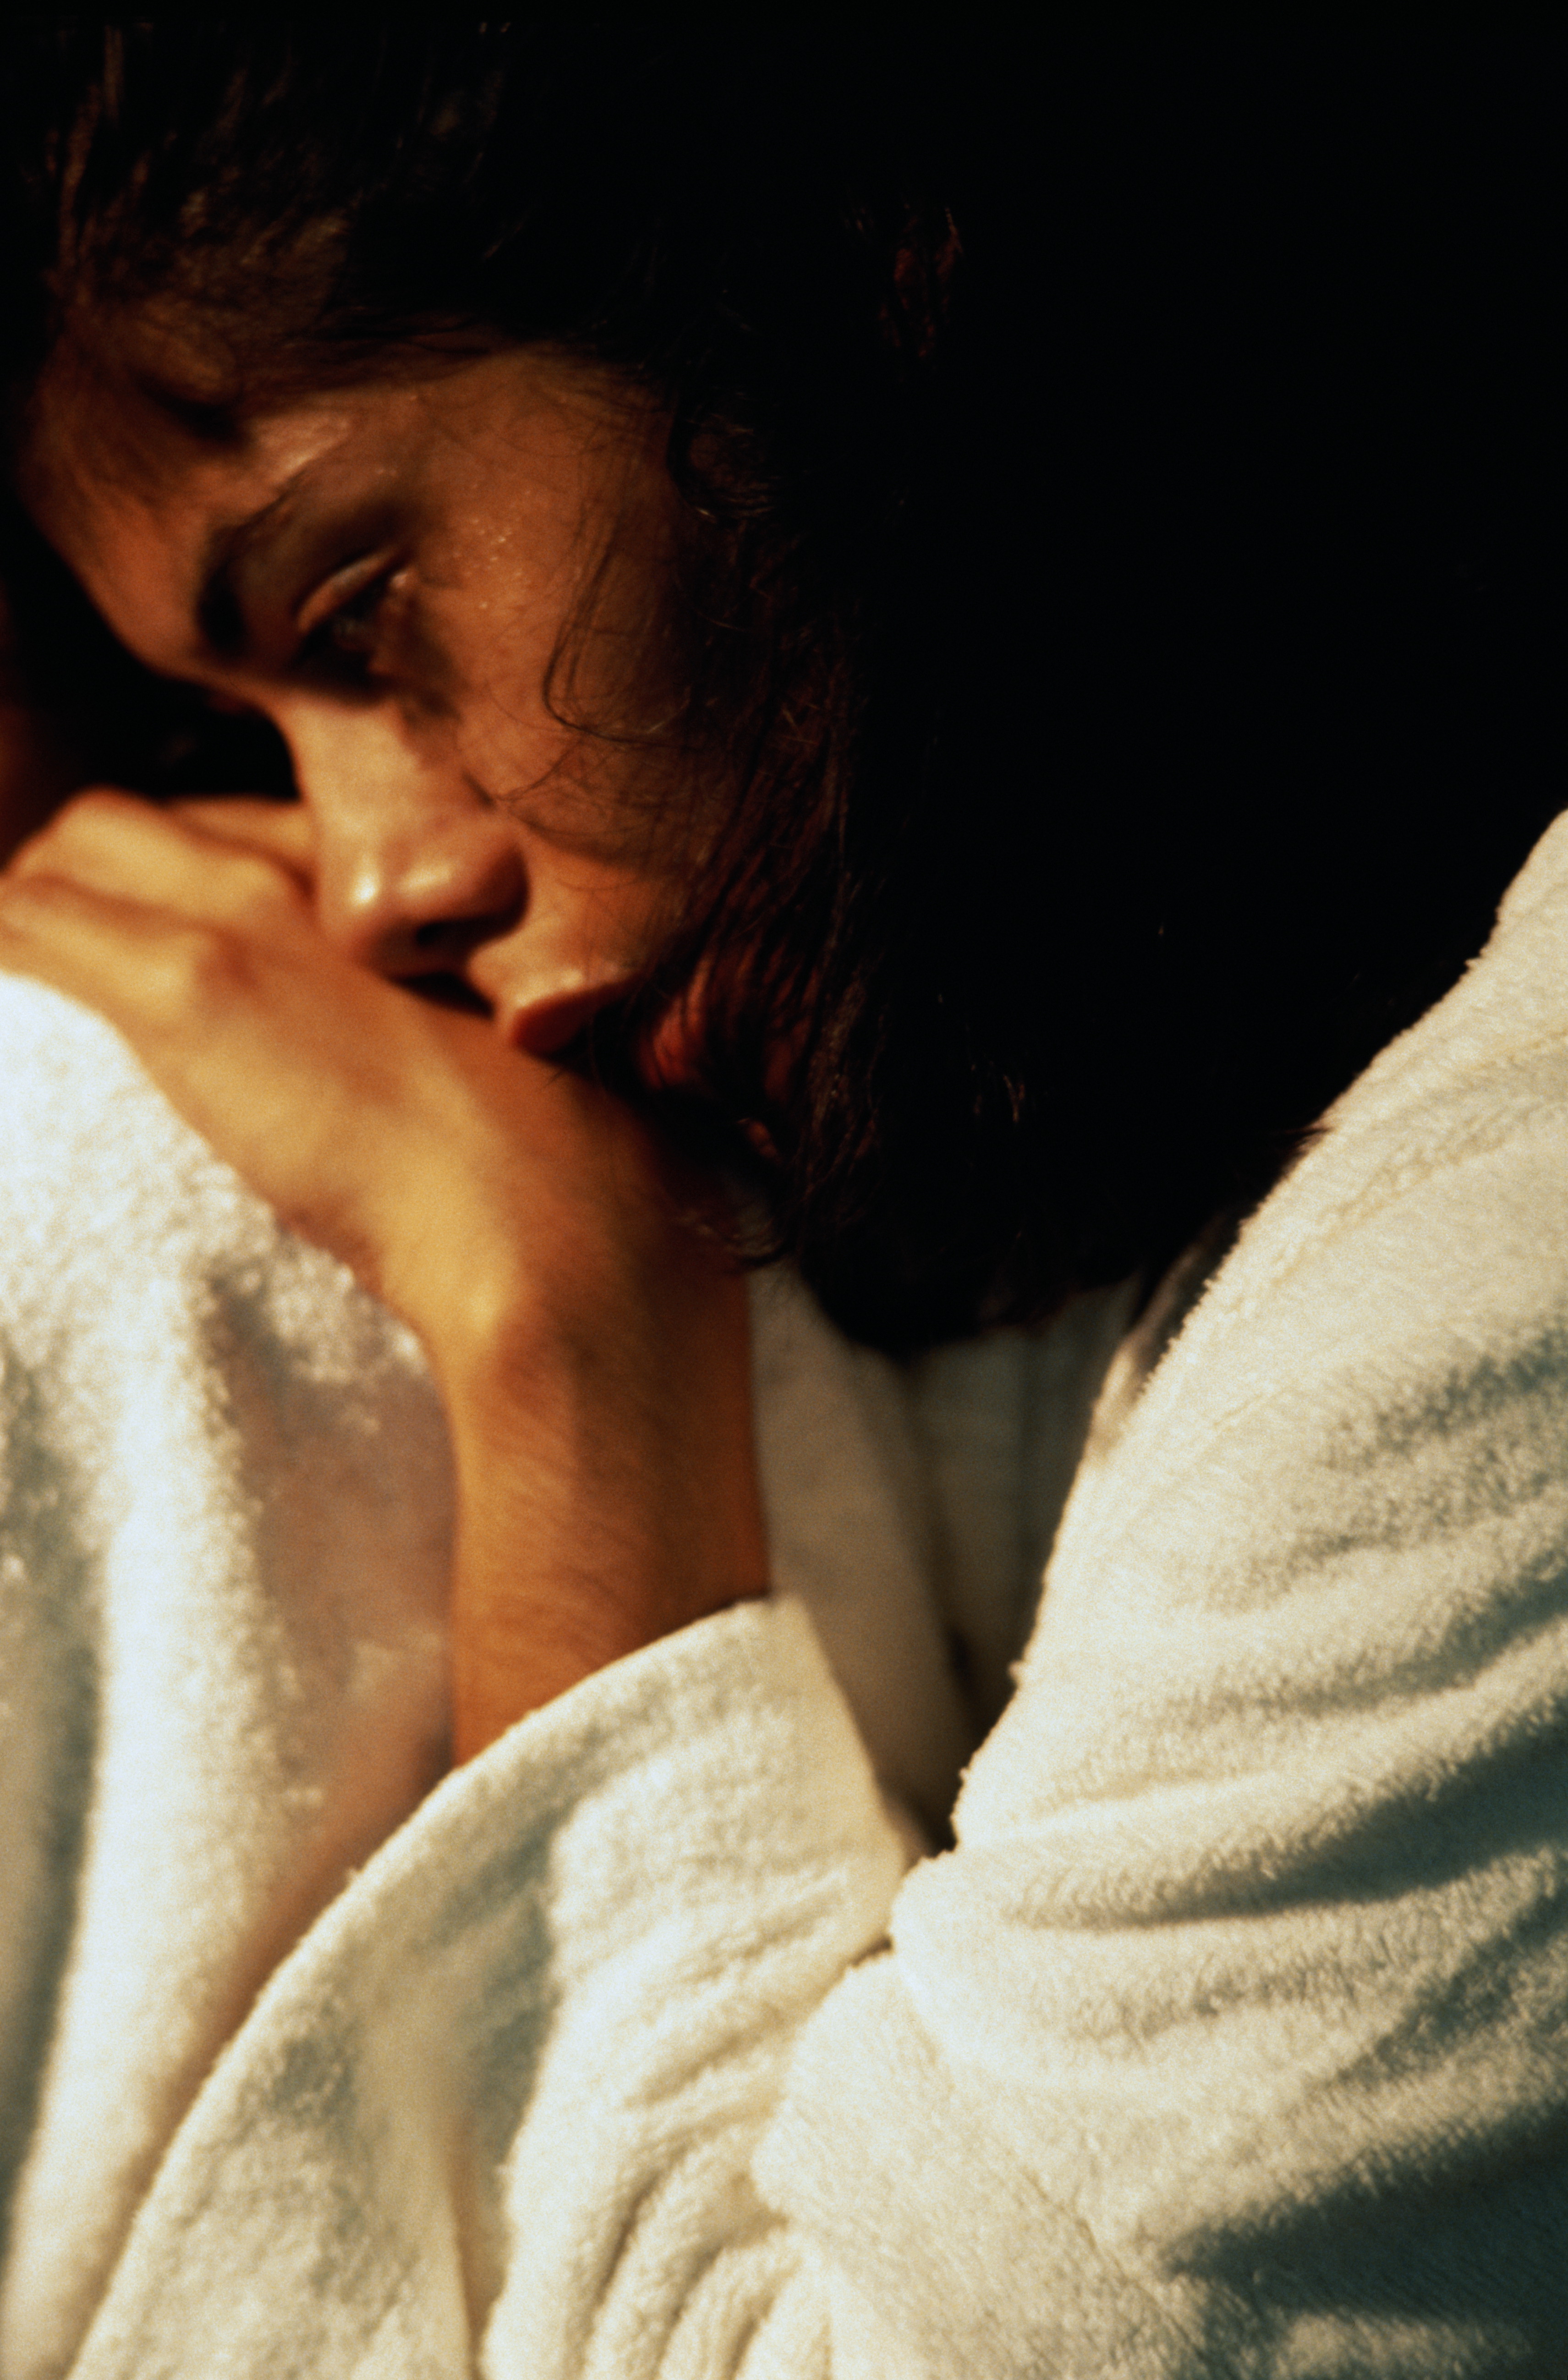 Woman in white bathrobe curled up and looking pensive